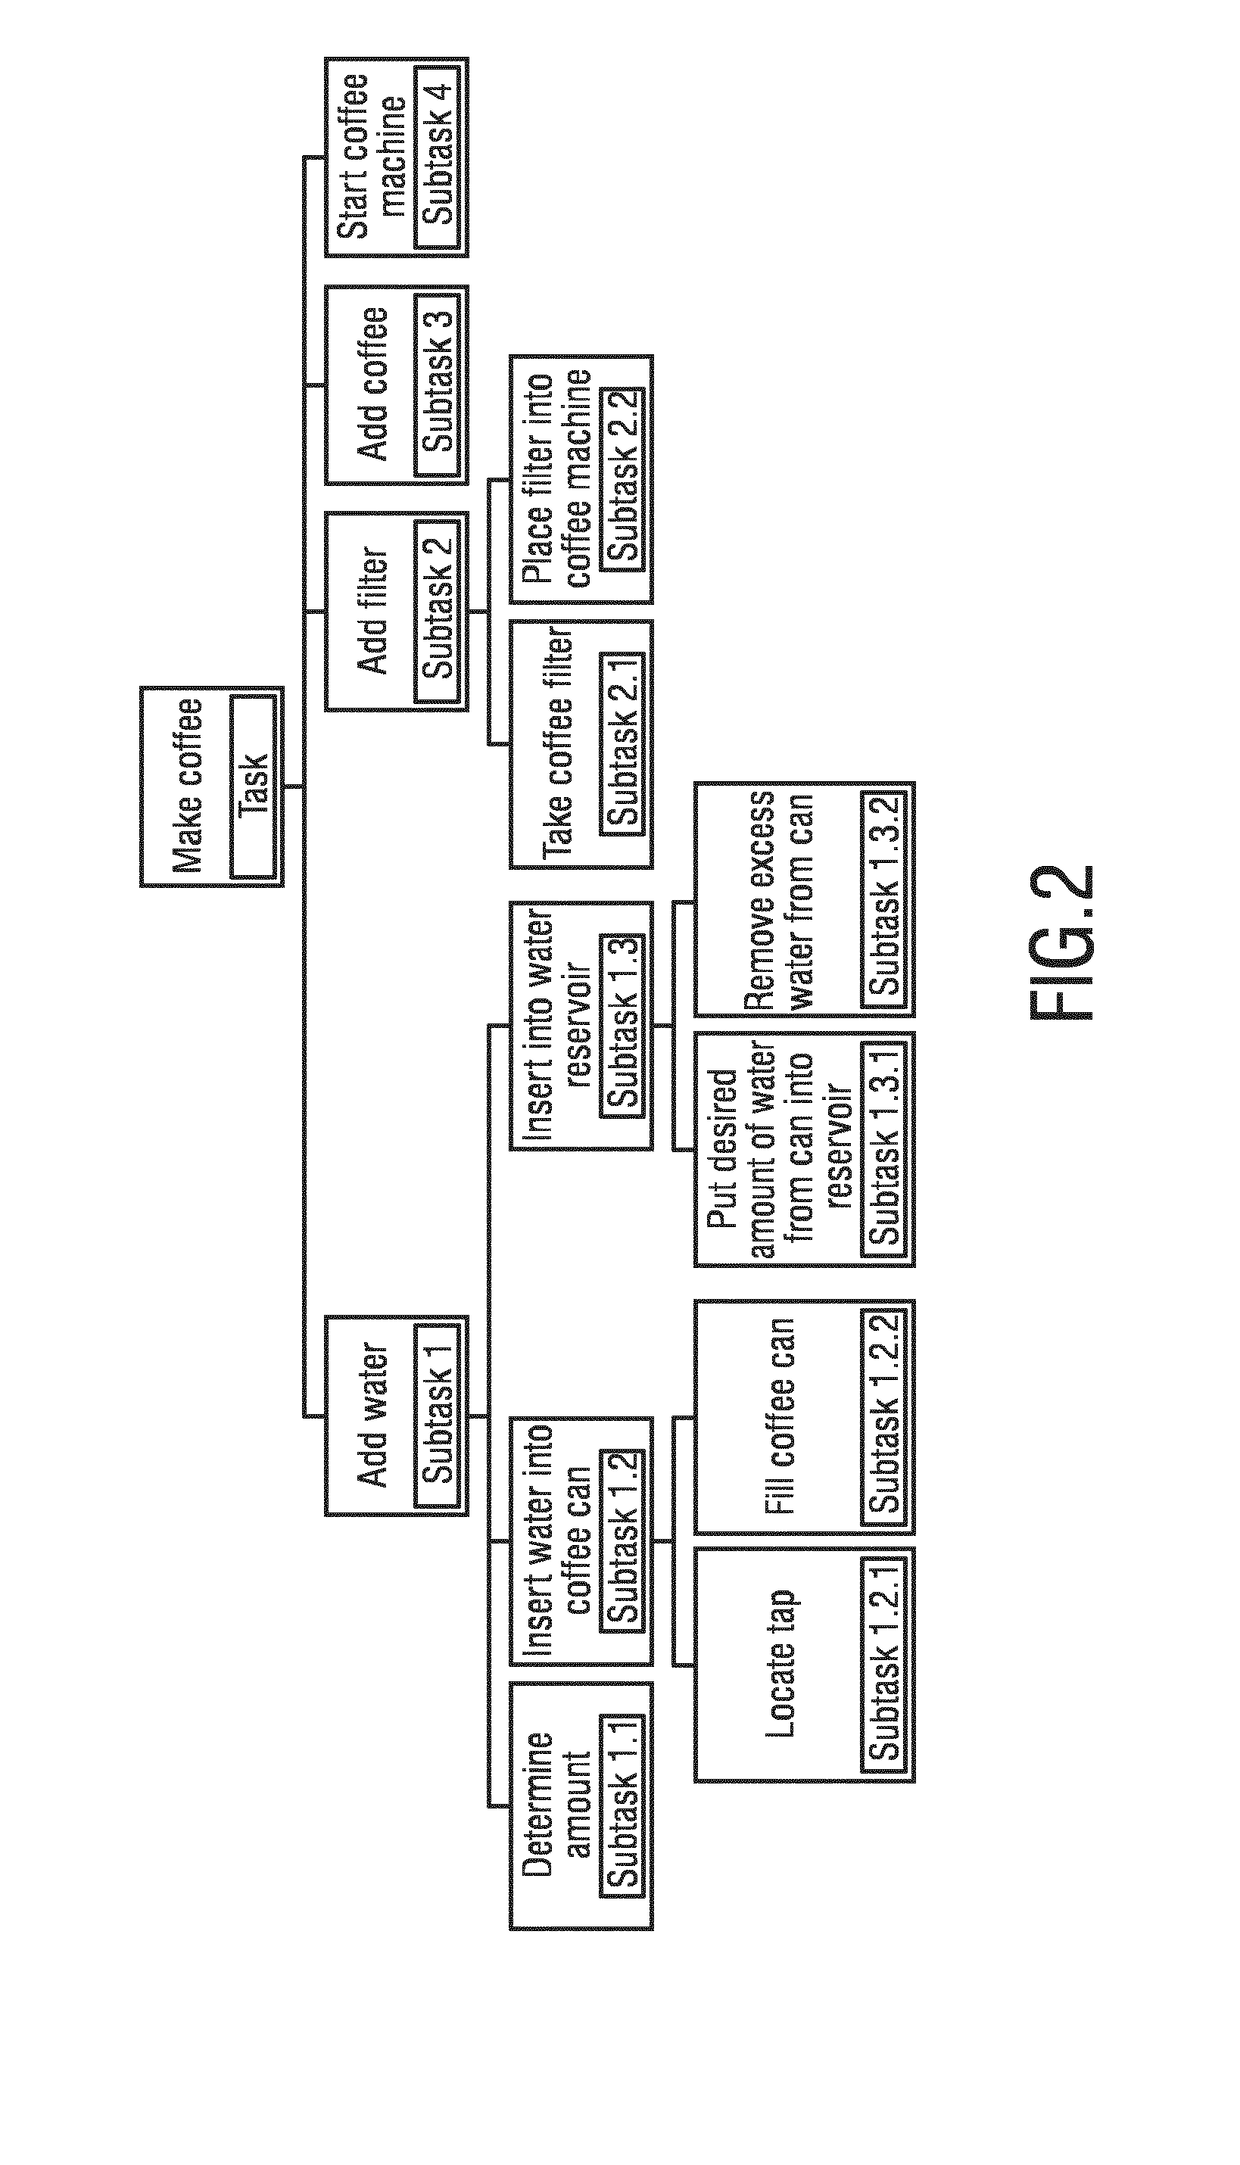 Assistance system for cognitively impaired persons